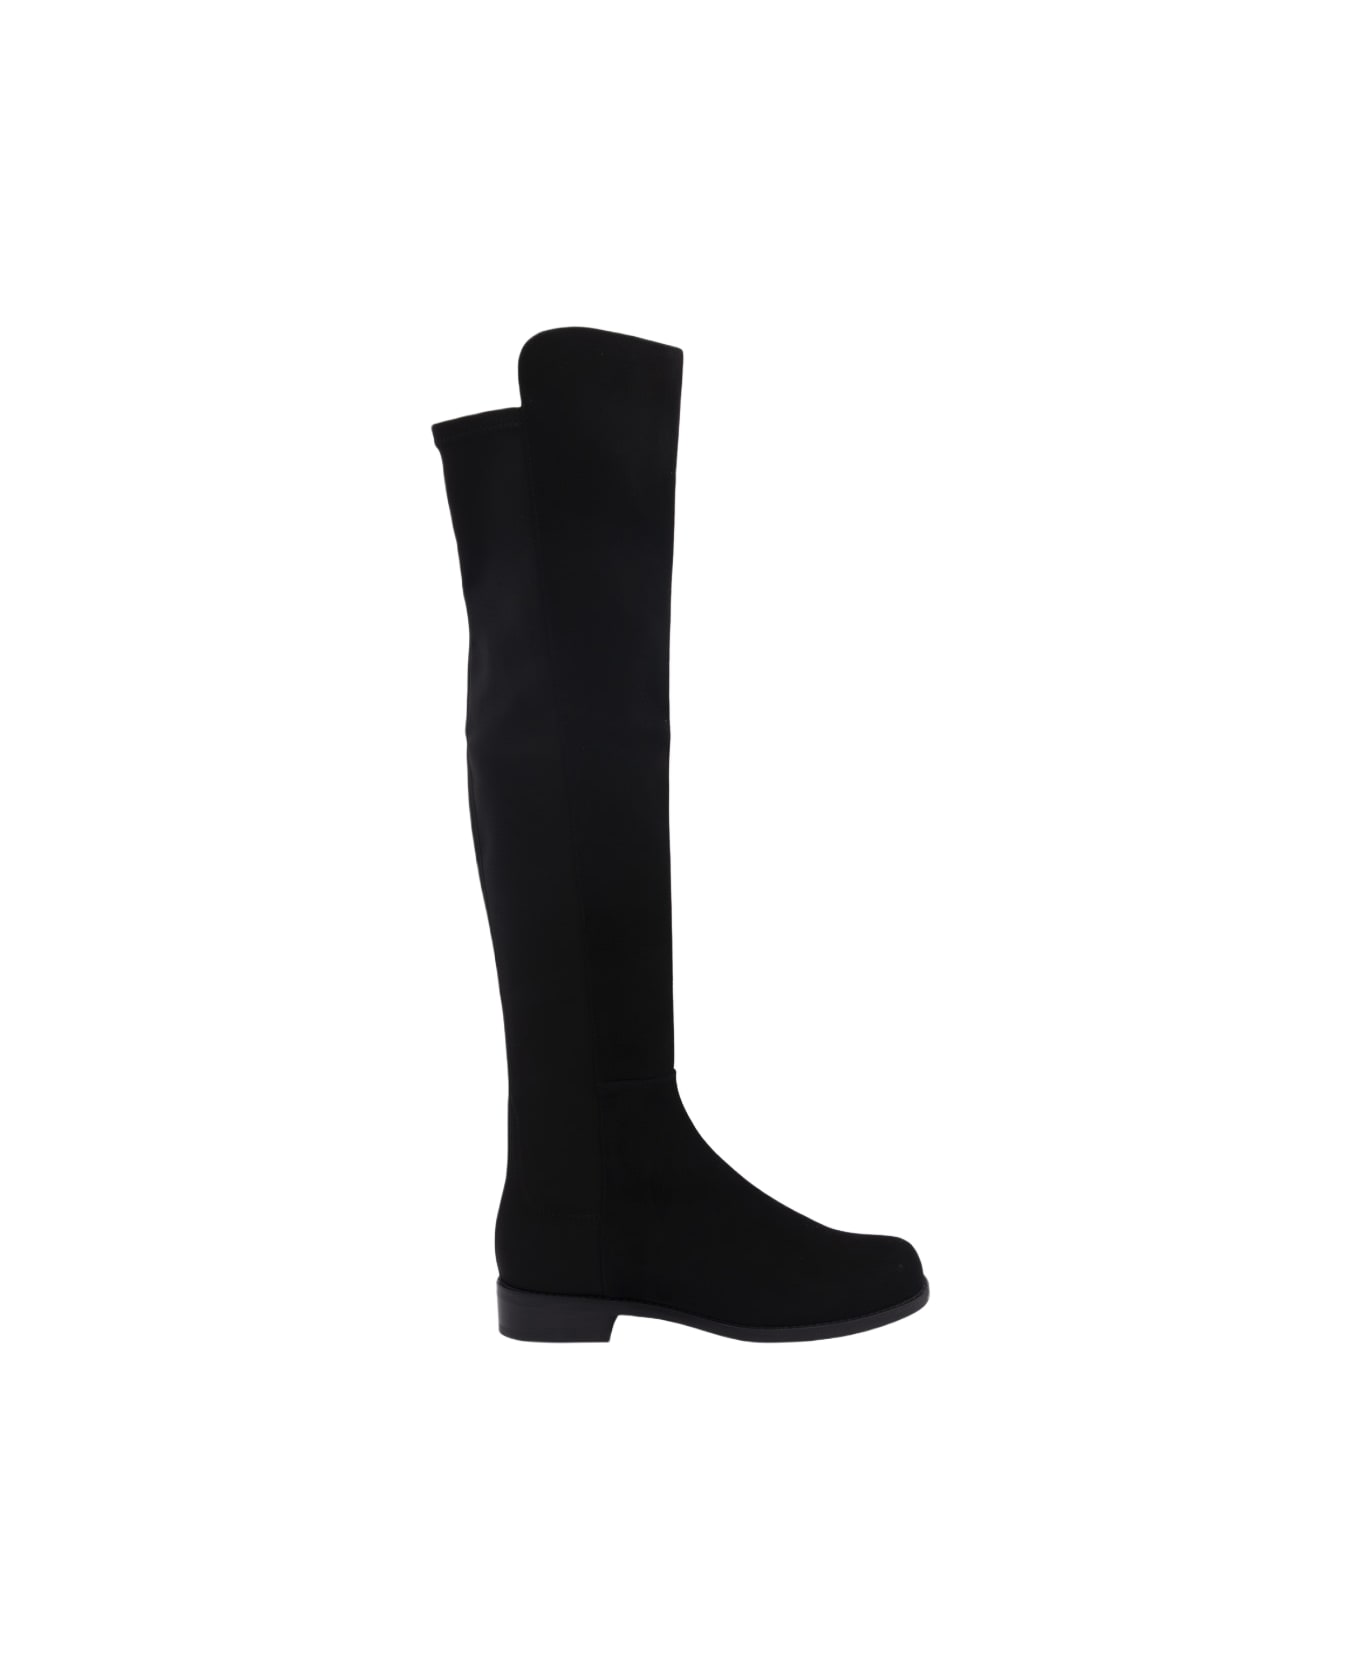 Stuart Weitzman Black Suede And Stretch 50/50 Boots - Black ブーツ